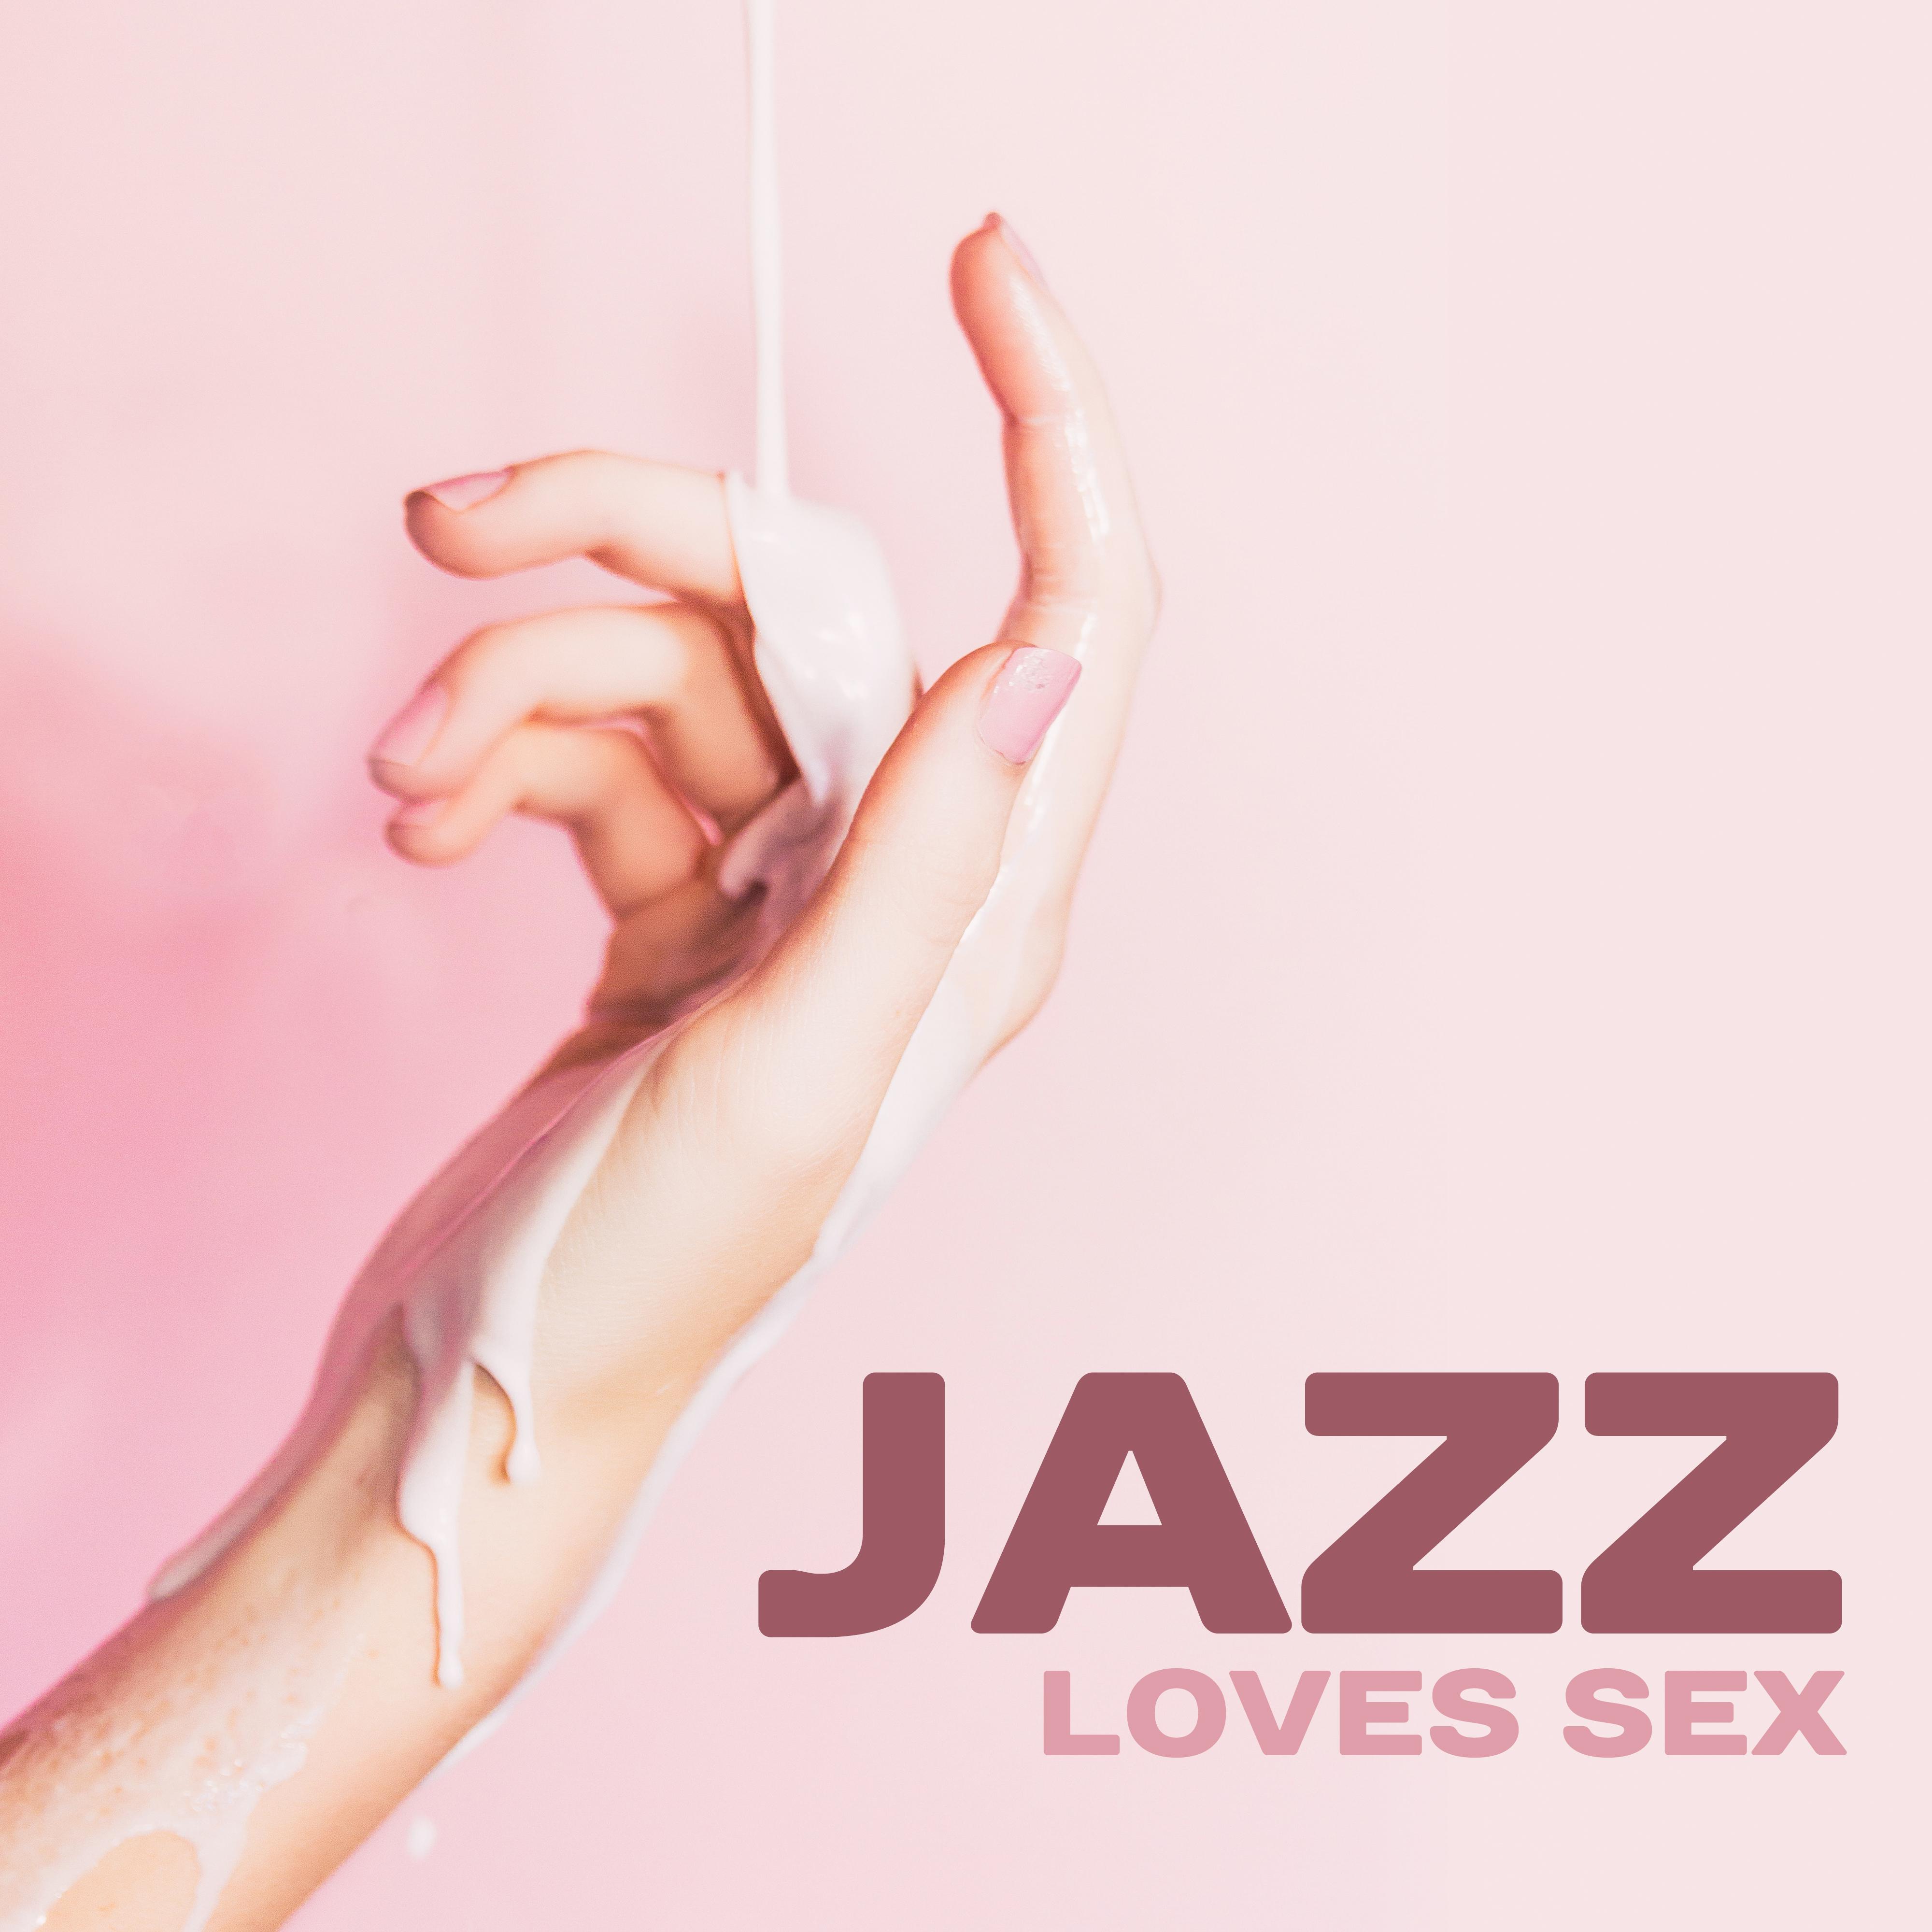 Jazz Loves *** – Instrumental Songs for Making Love, Deep Penetration, Orgasm for Two, Erotic Jazz, Sensual Night